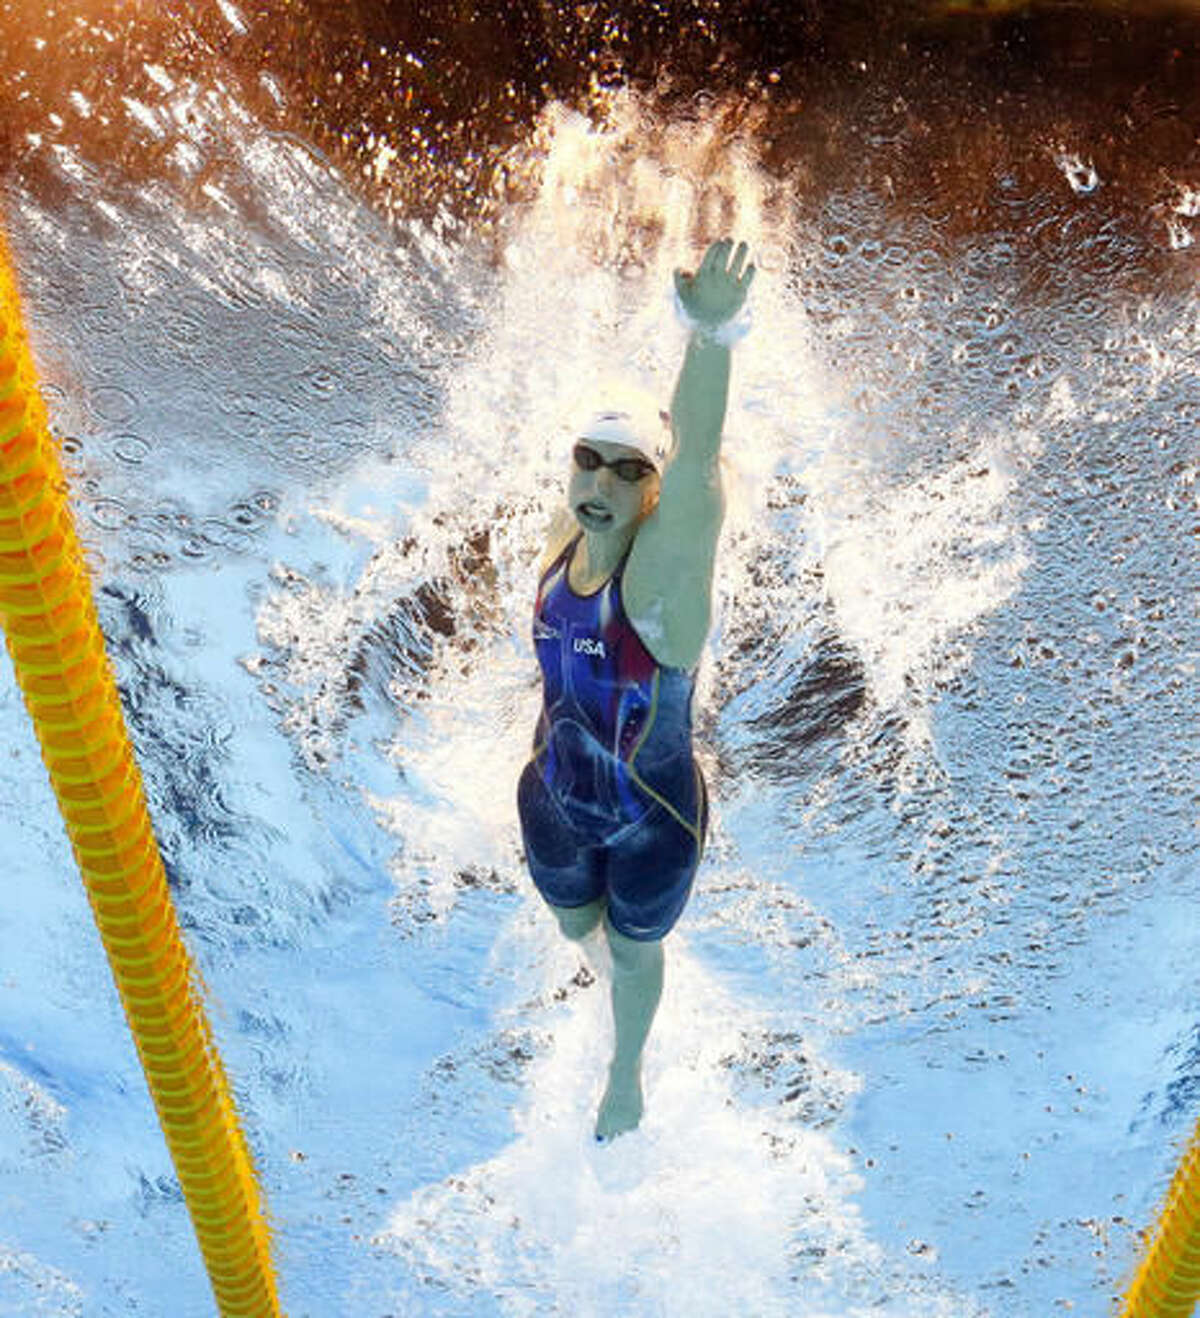 United States' Katie Ledecky competes in a heat of the women's 400-meter freestyle during the swimming competitions at the 2016 Summer Olympics, Sunday, Aug. 7, 2016, in Rio de Janeiro, Brazil. (AP Photo/David J. Phillip)